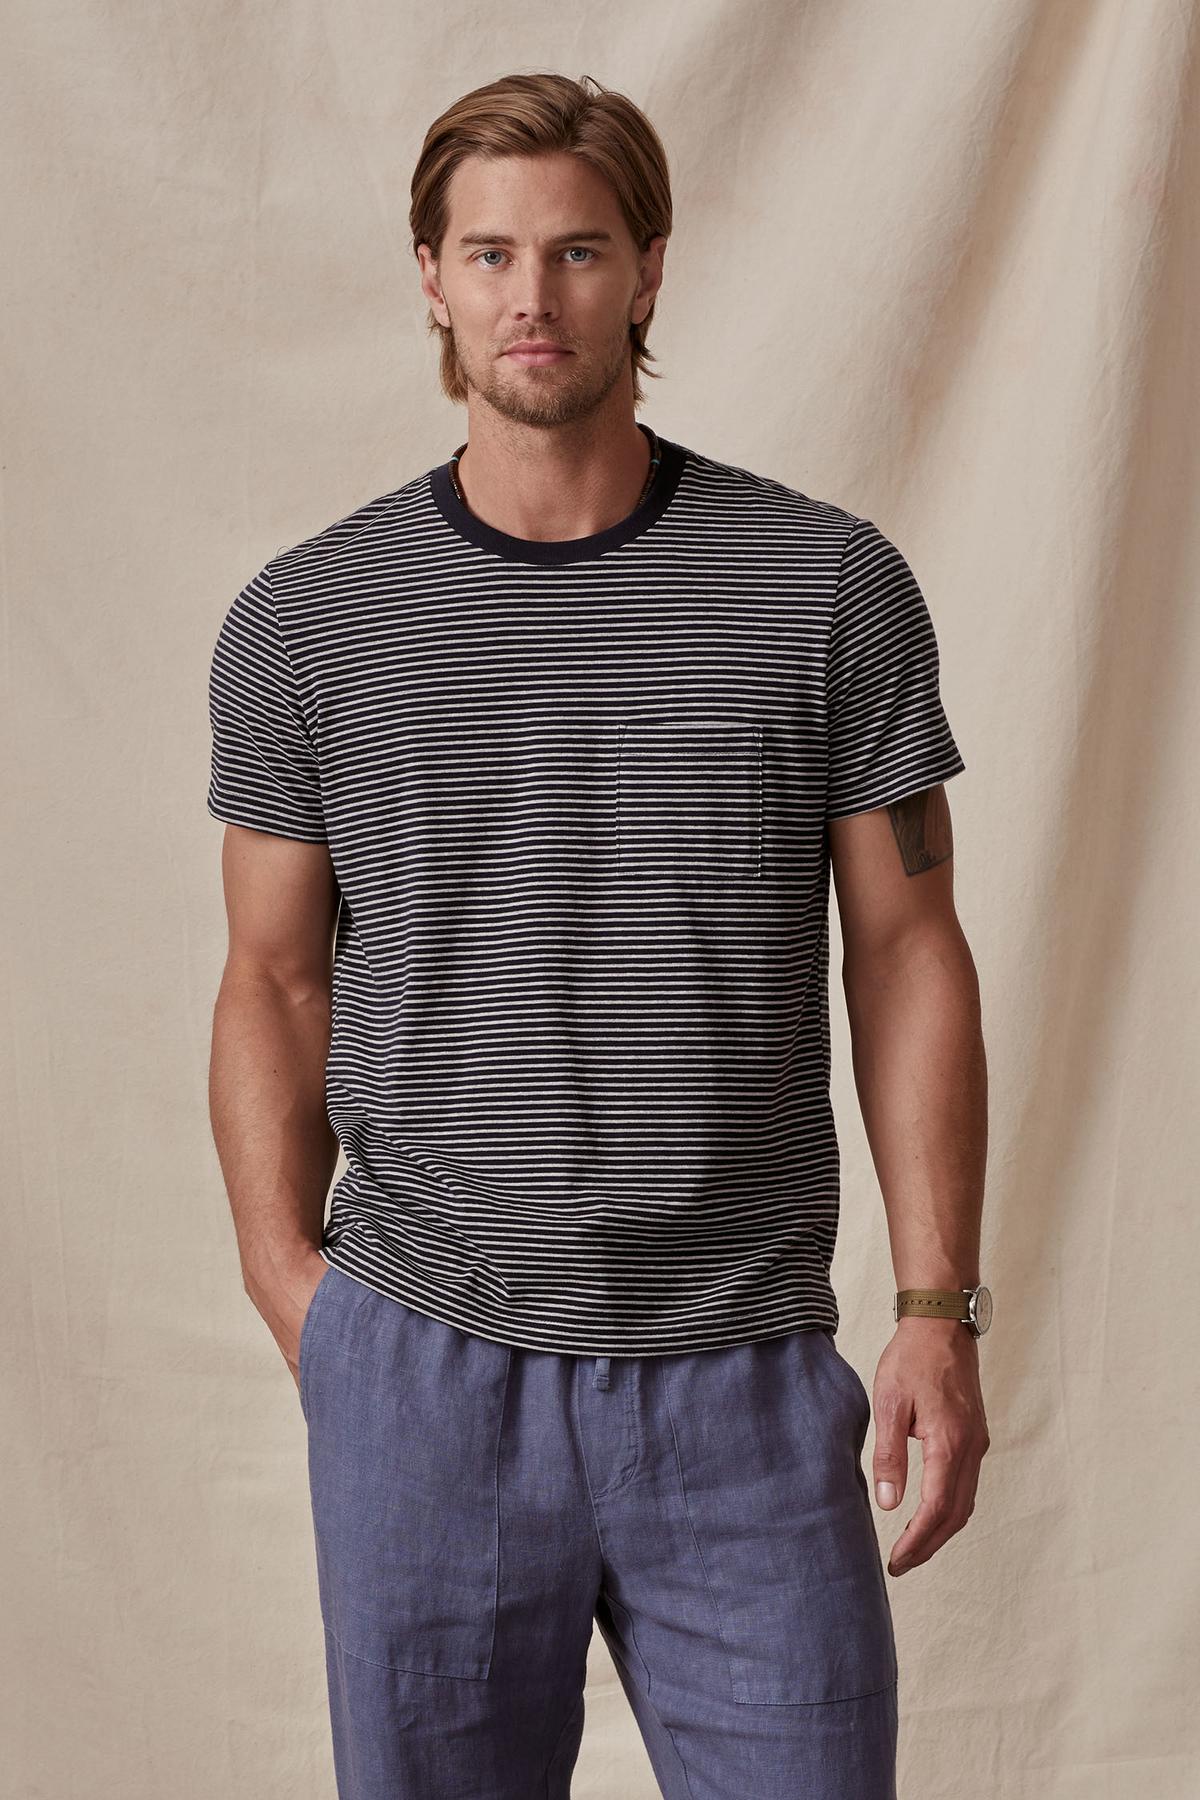 A man in a CHAZZ TEE from Velvet by Graham & Spencer stands against a beige backdrop, looking directly at the camera with a slight smile.-36732512993473